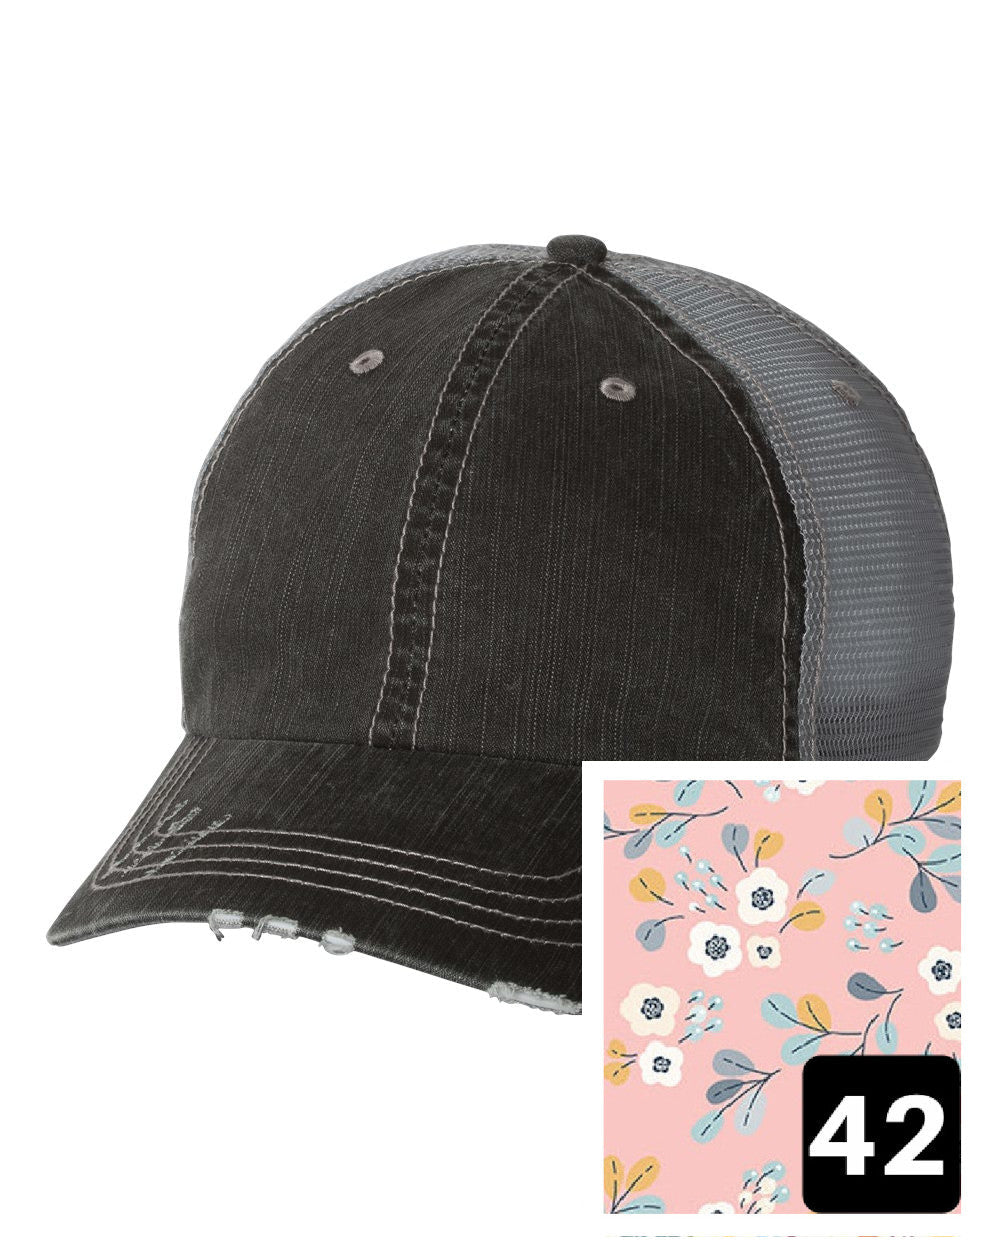 gray distressed trucker hat with light blue and pink mosaic fabric state of Alaska